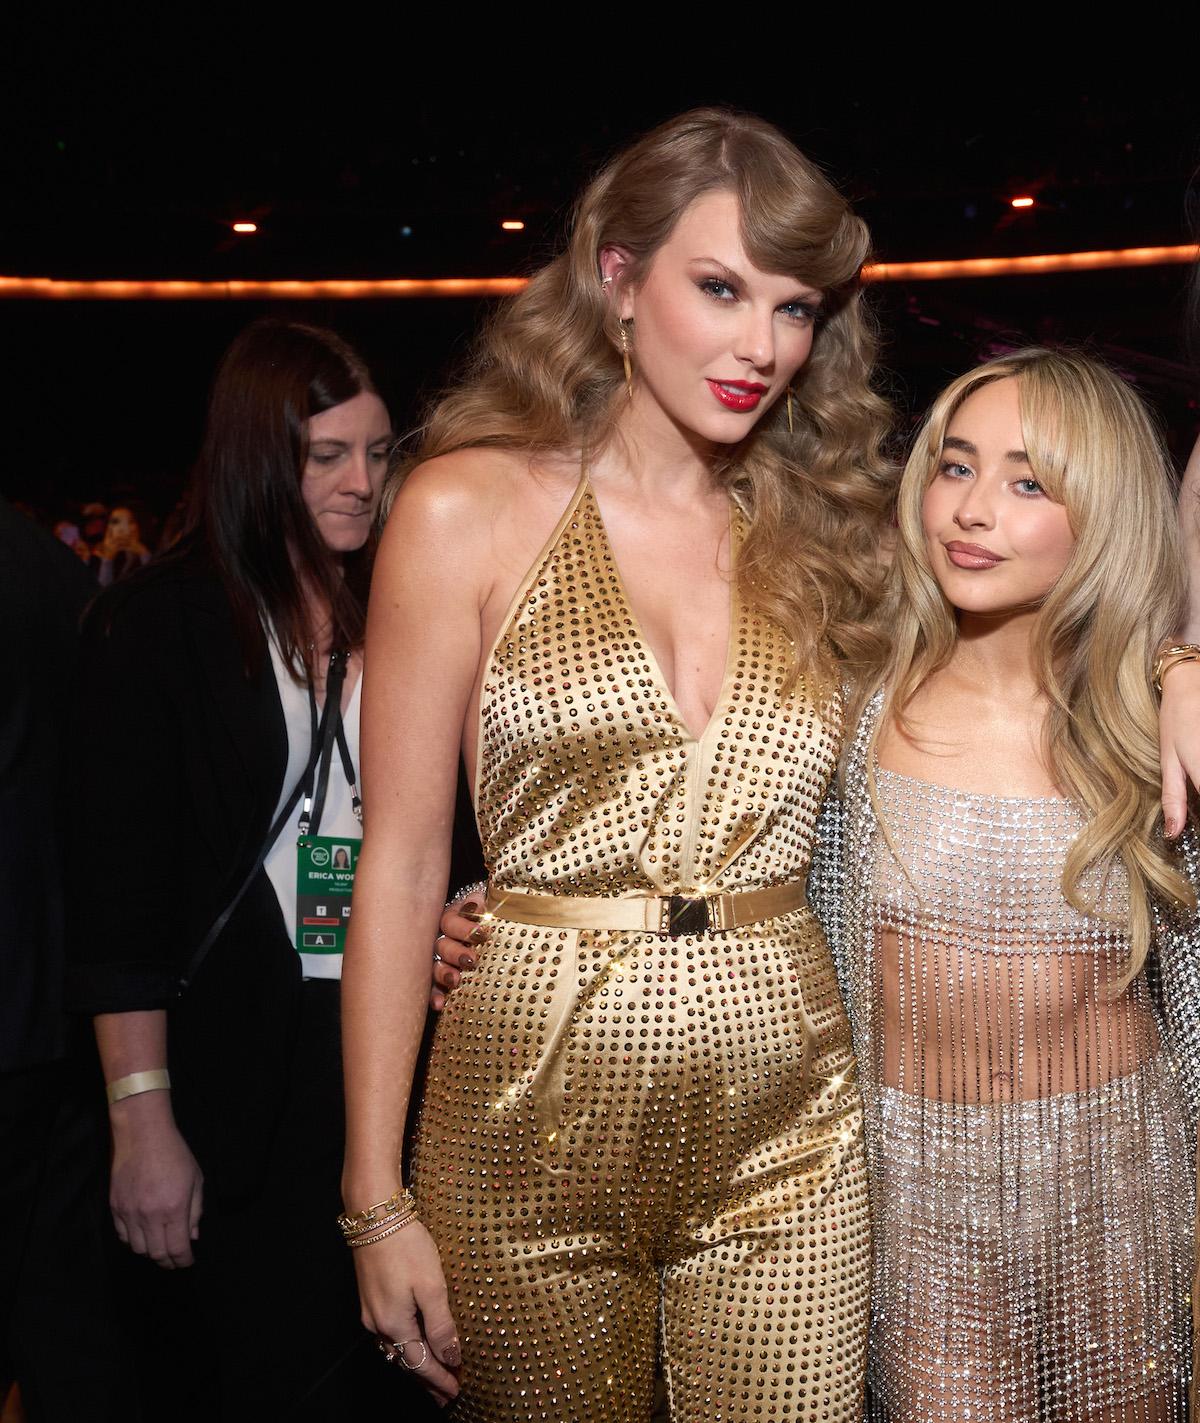  Taylor Swift and Sabrina Carpenter together at the American Music Awards in 2022. Olivia Rodrigo was also in attendance at this award show, but didn't interact with Taylor.